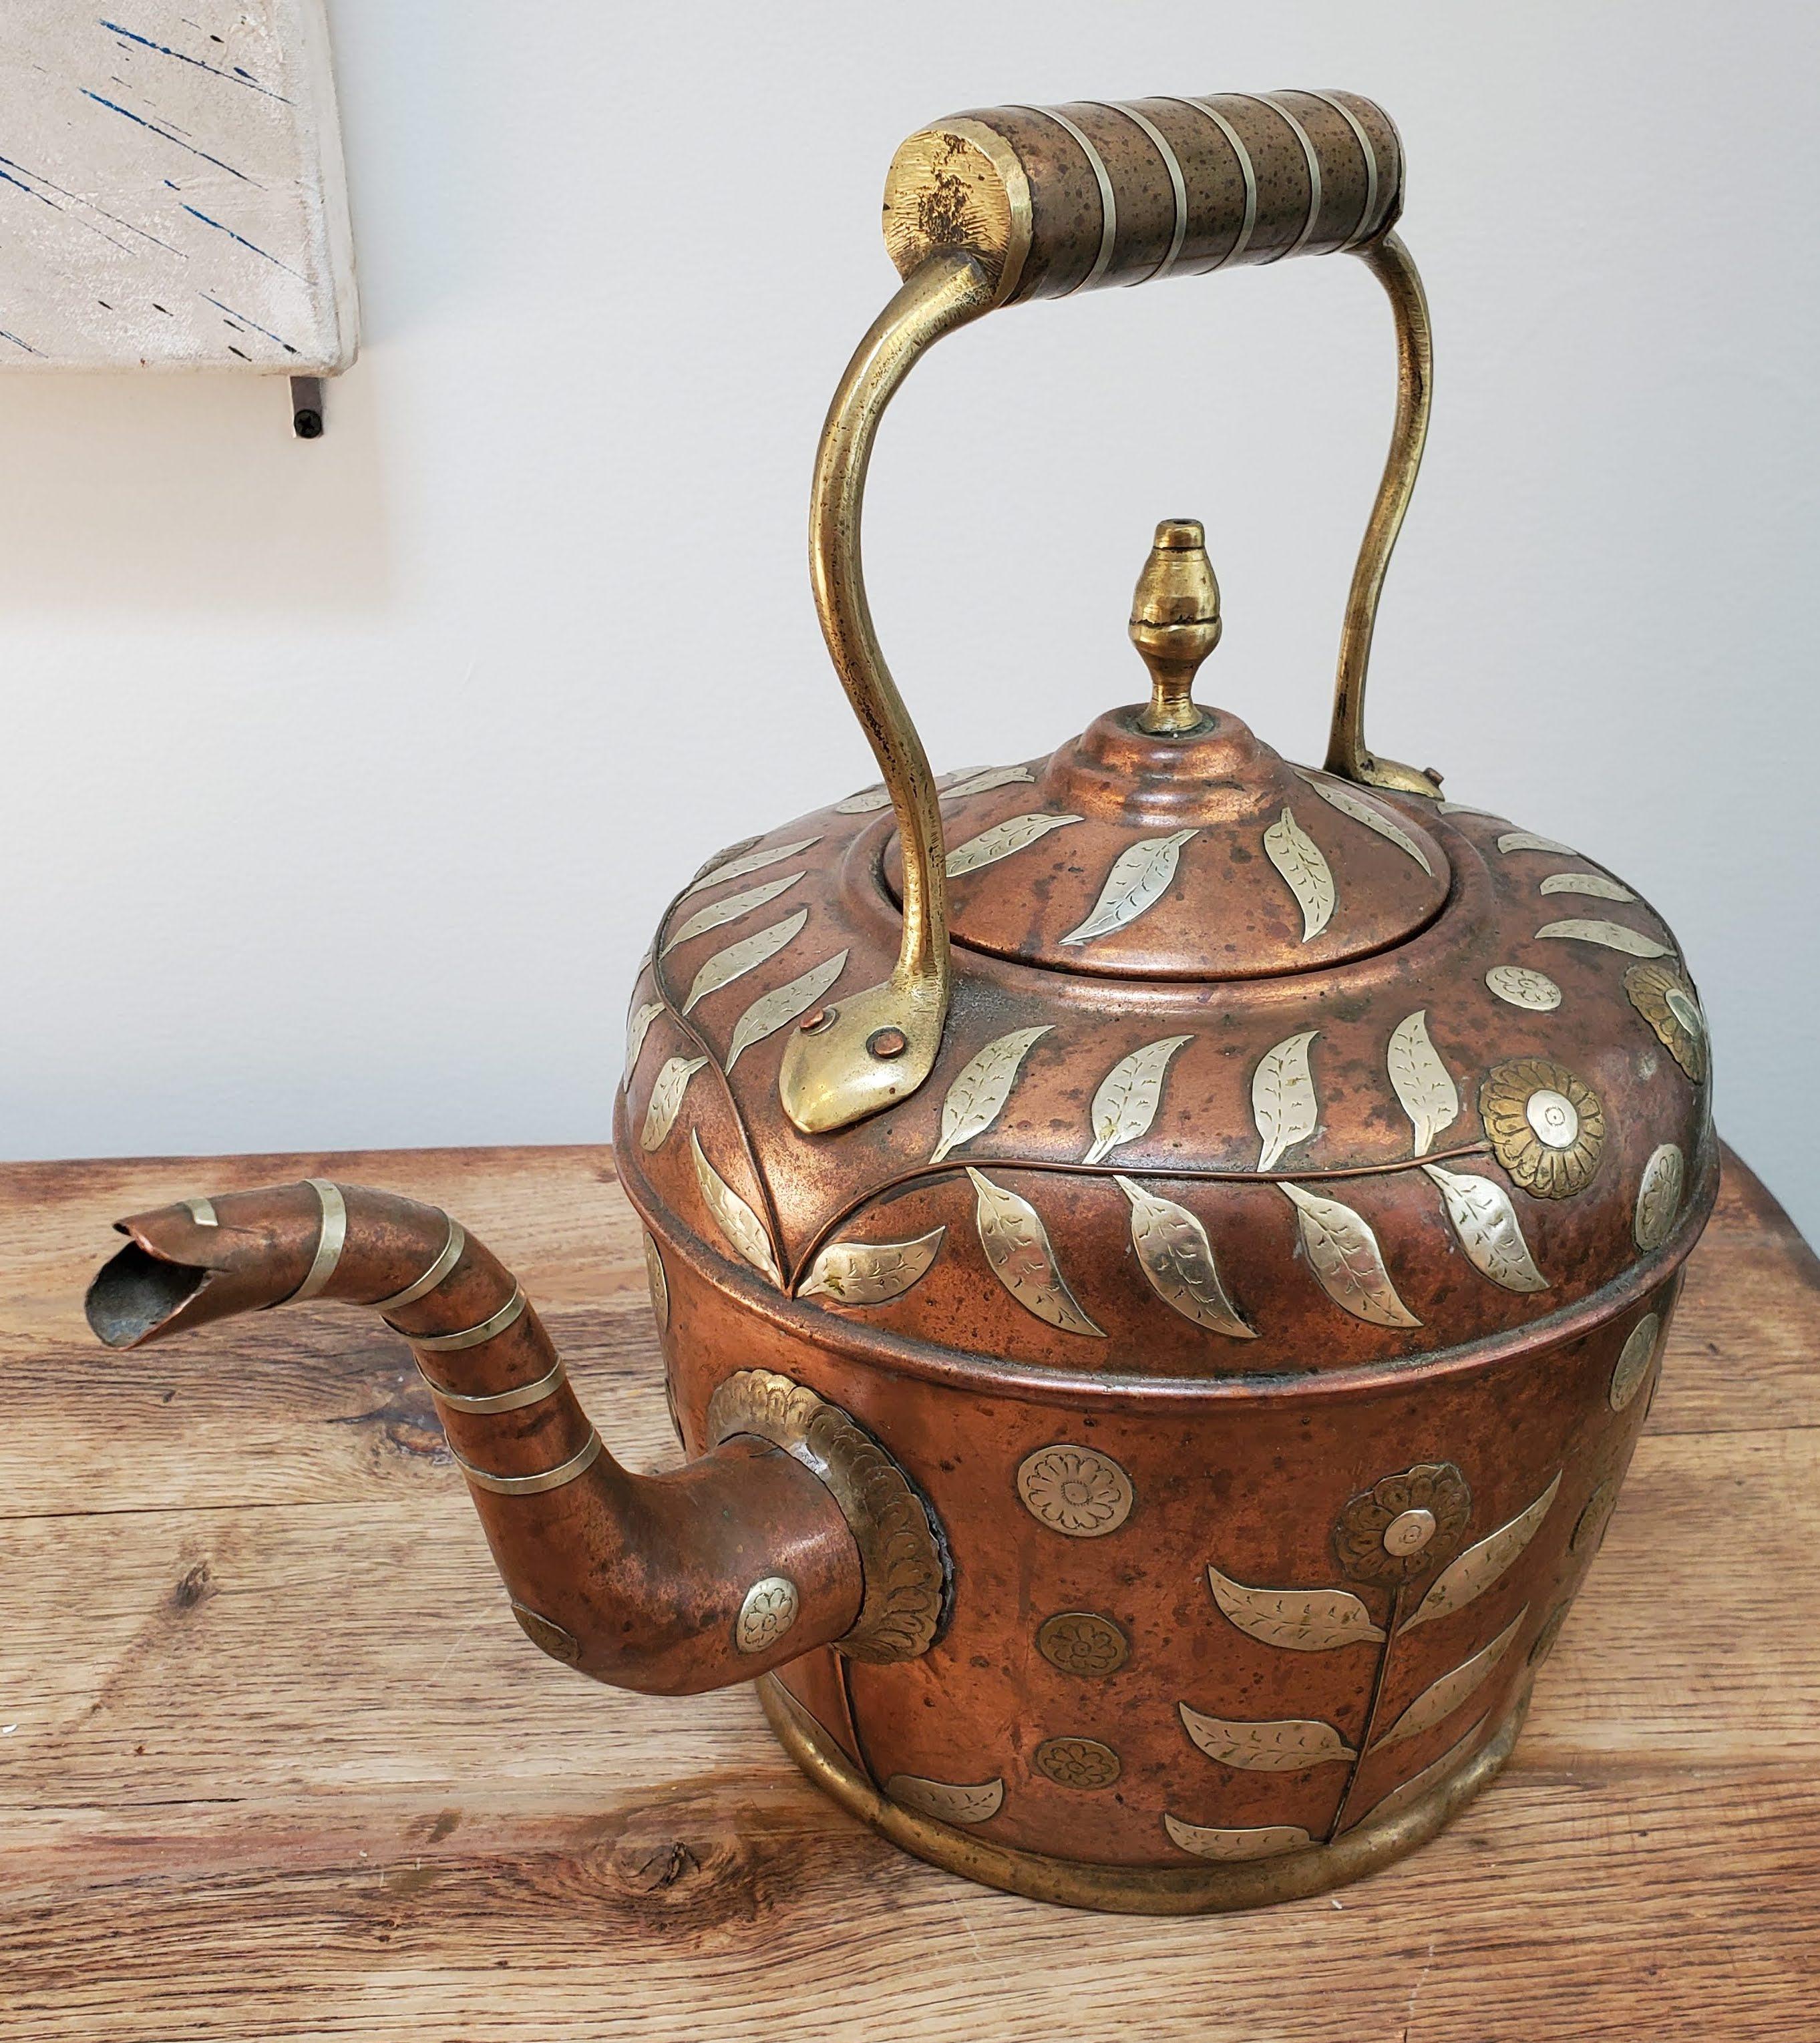 This beautiful 19th century copper kettle is perfect for any teapot collector. Made in India during the British Empire in a typical English form with copper with brass and silver floral decoration. Made circa 1850.
Measures: 12.5” H, 8” Dm.